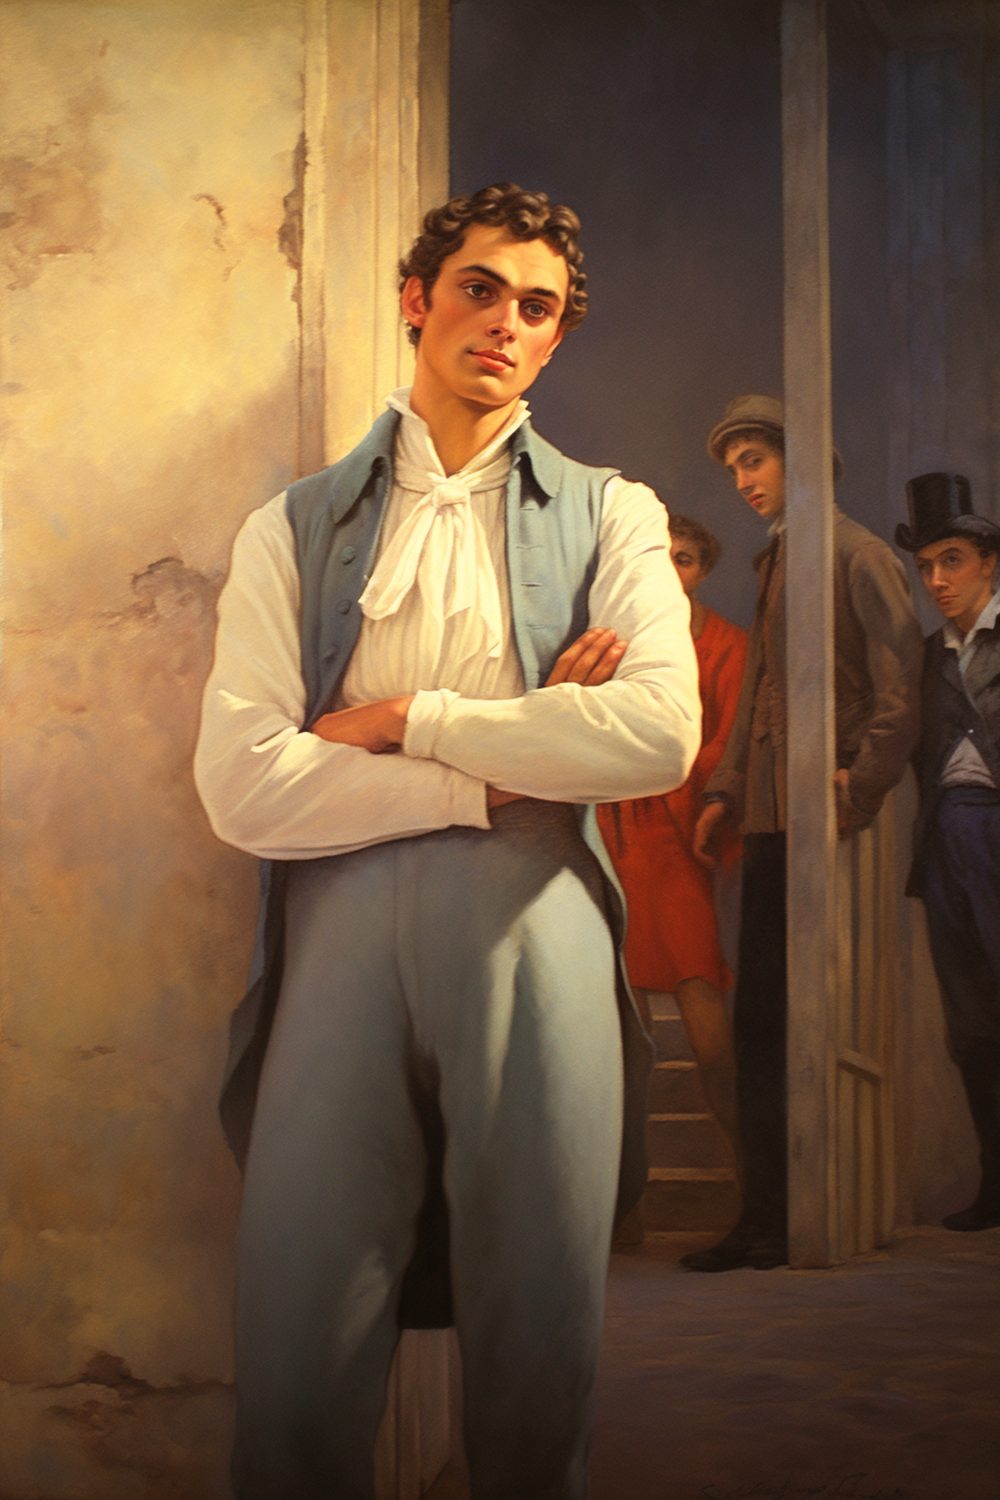 The illustration is of a man in a gray suit and a white shirt with lace white tie standing in front of an opening in a wall. He is looking at the viewer with a relaxed expression on his face. Behind him are several other men standing in the background and looking at him with envy.